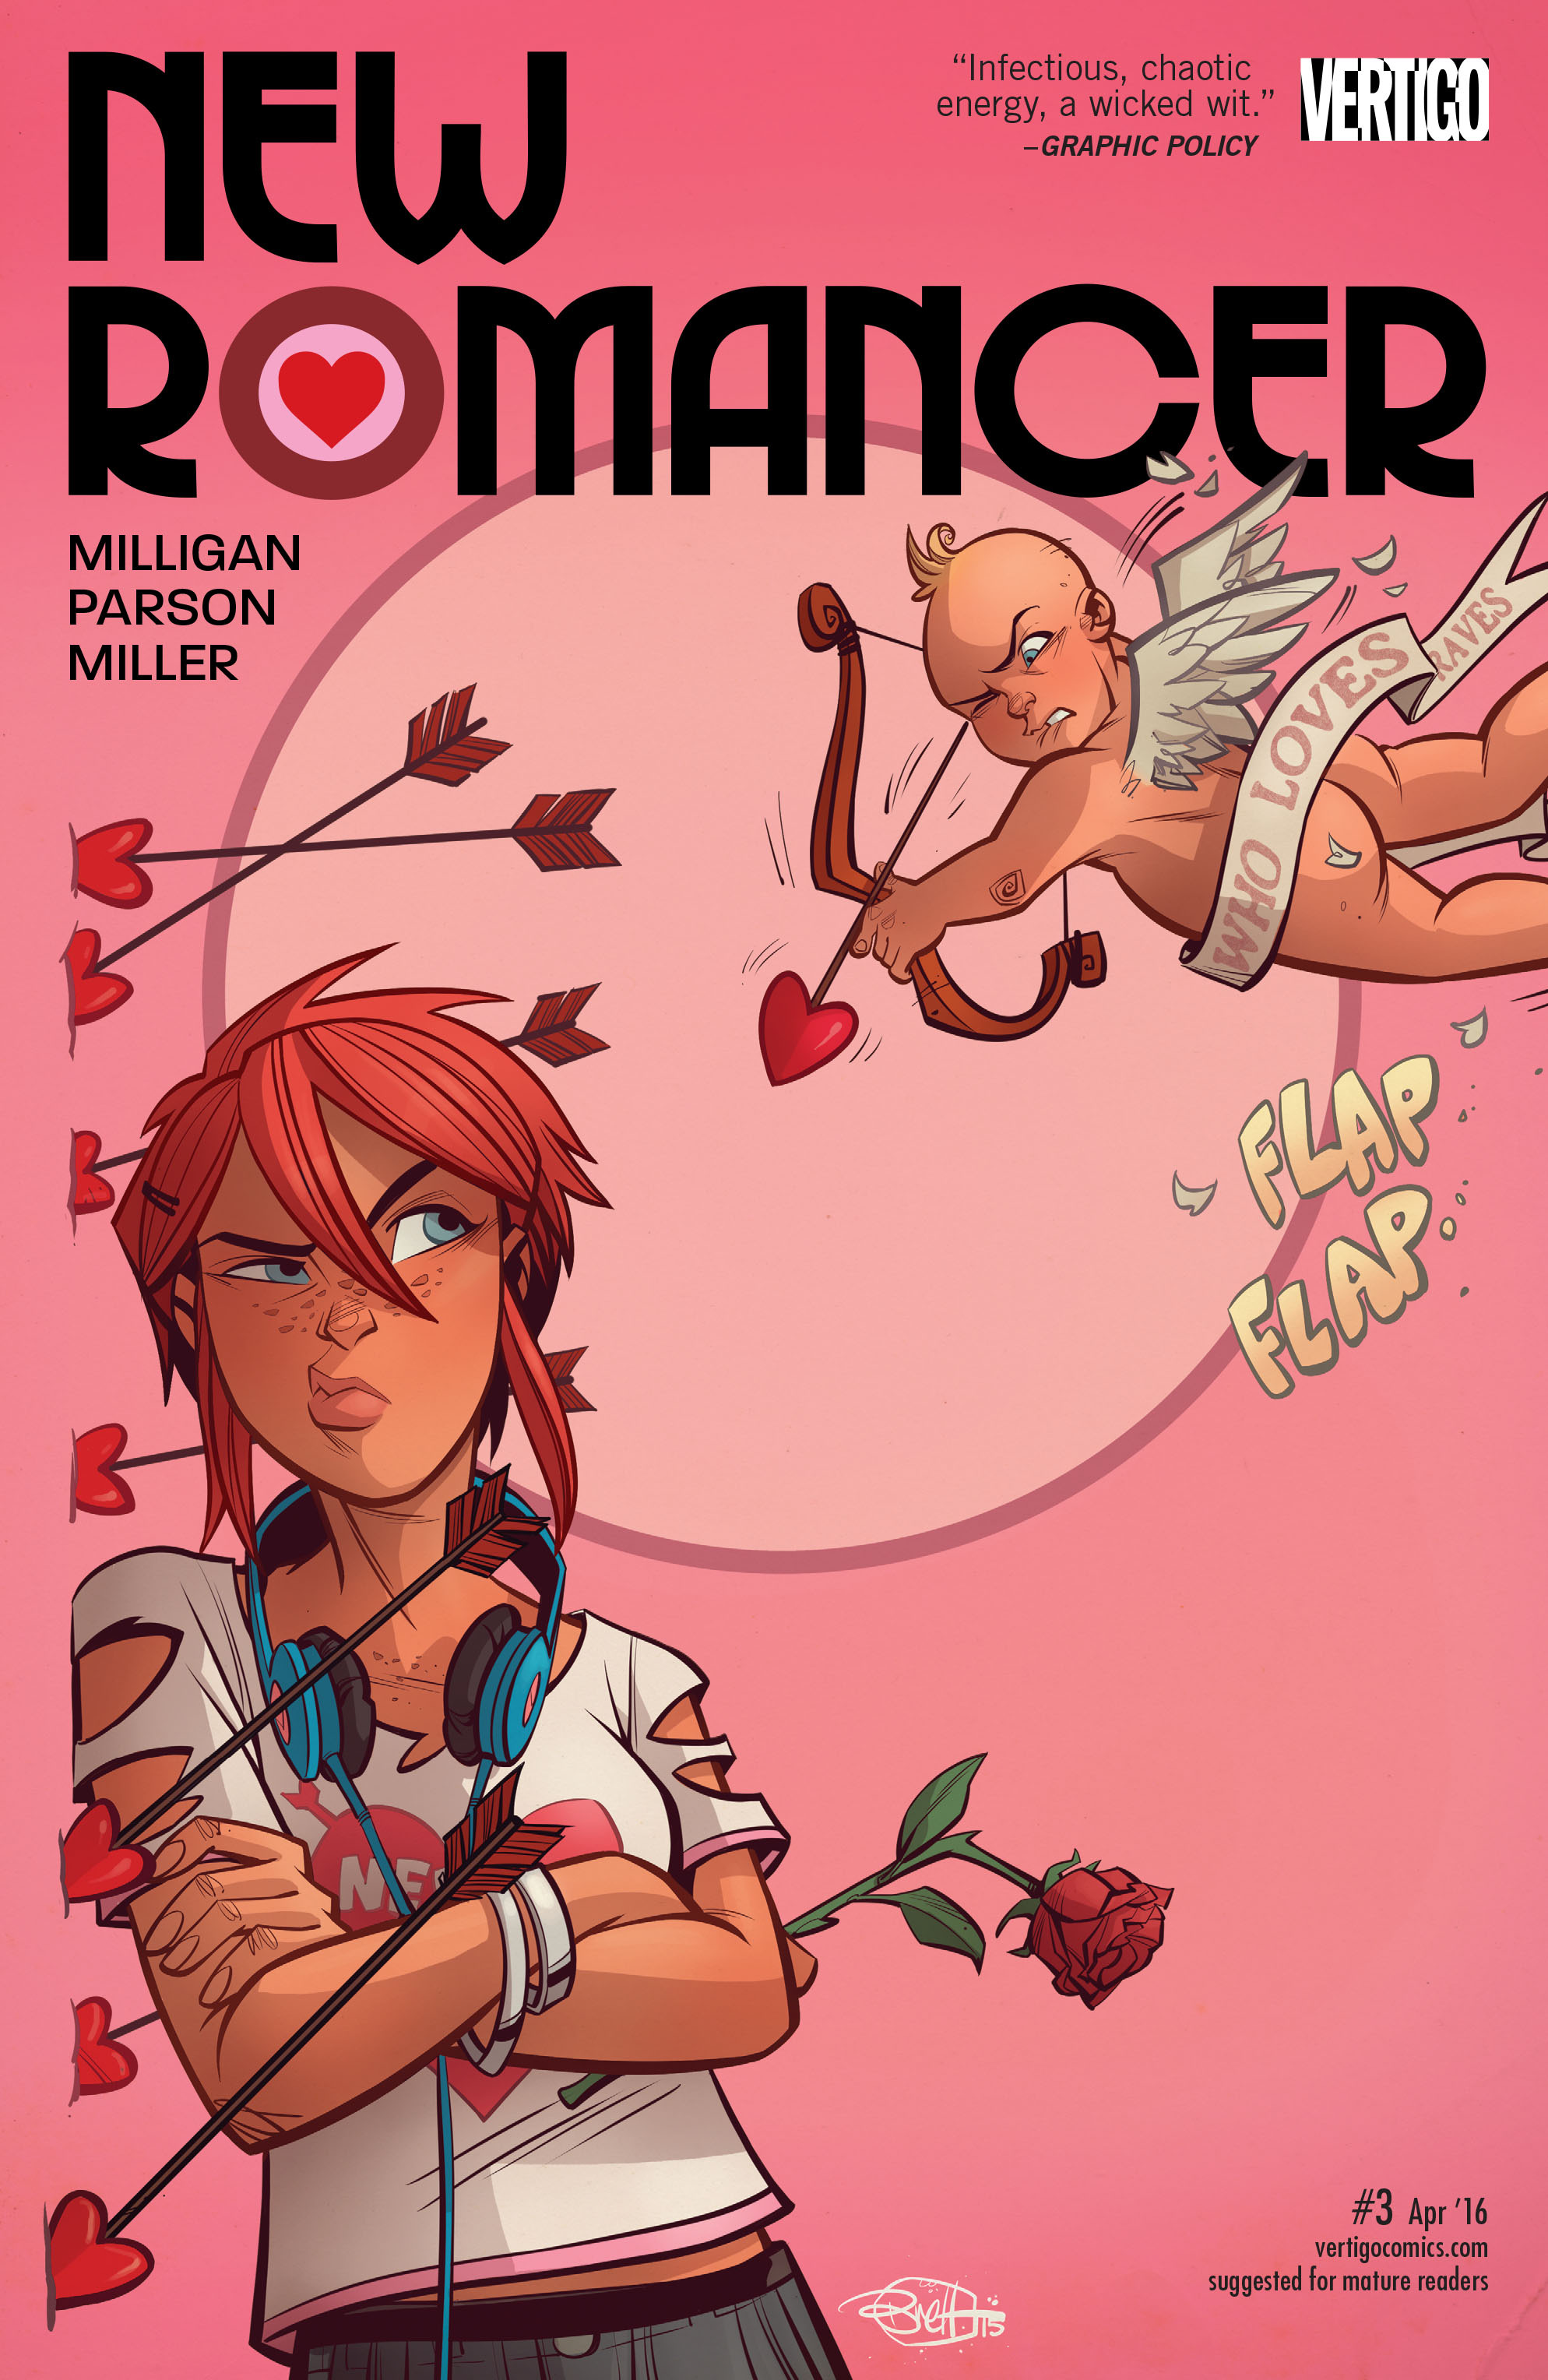 Read online New Romancer comic -  Issue #3 - 1